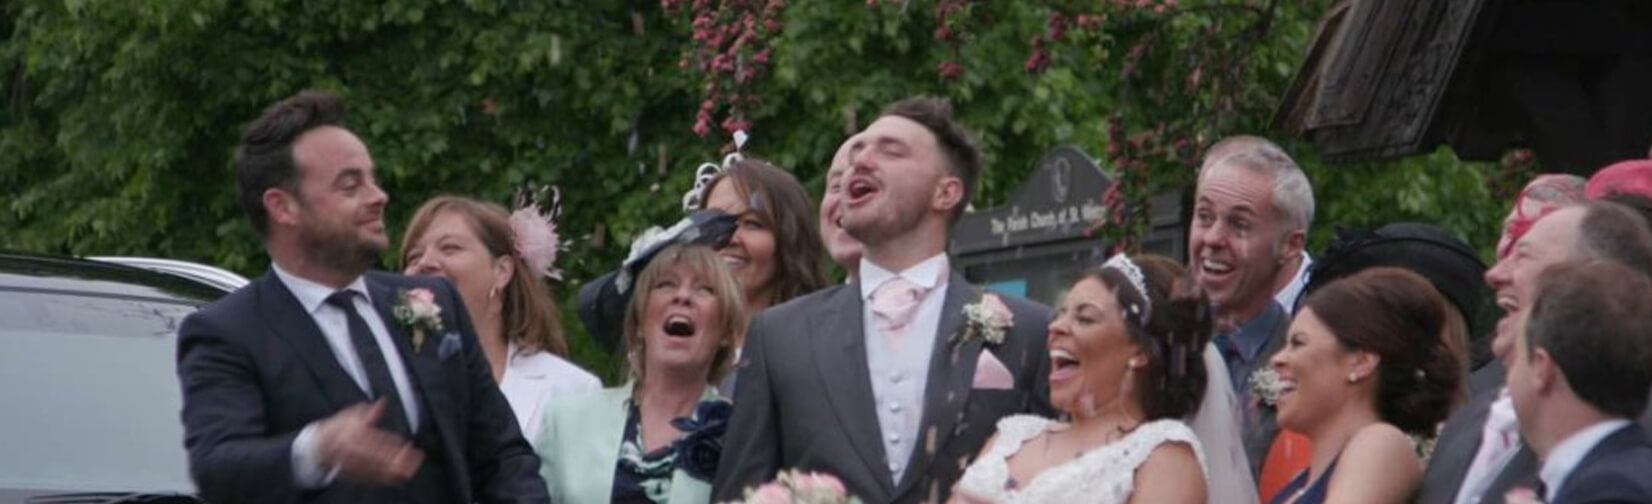 ANT and Dec get BRIDE to the Church on Time  !